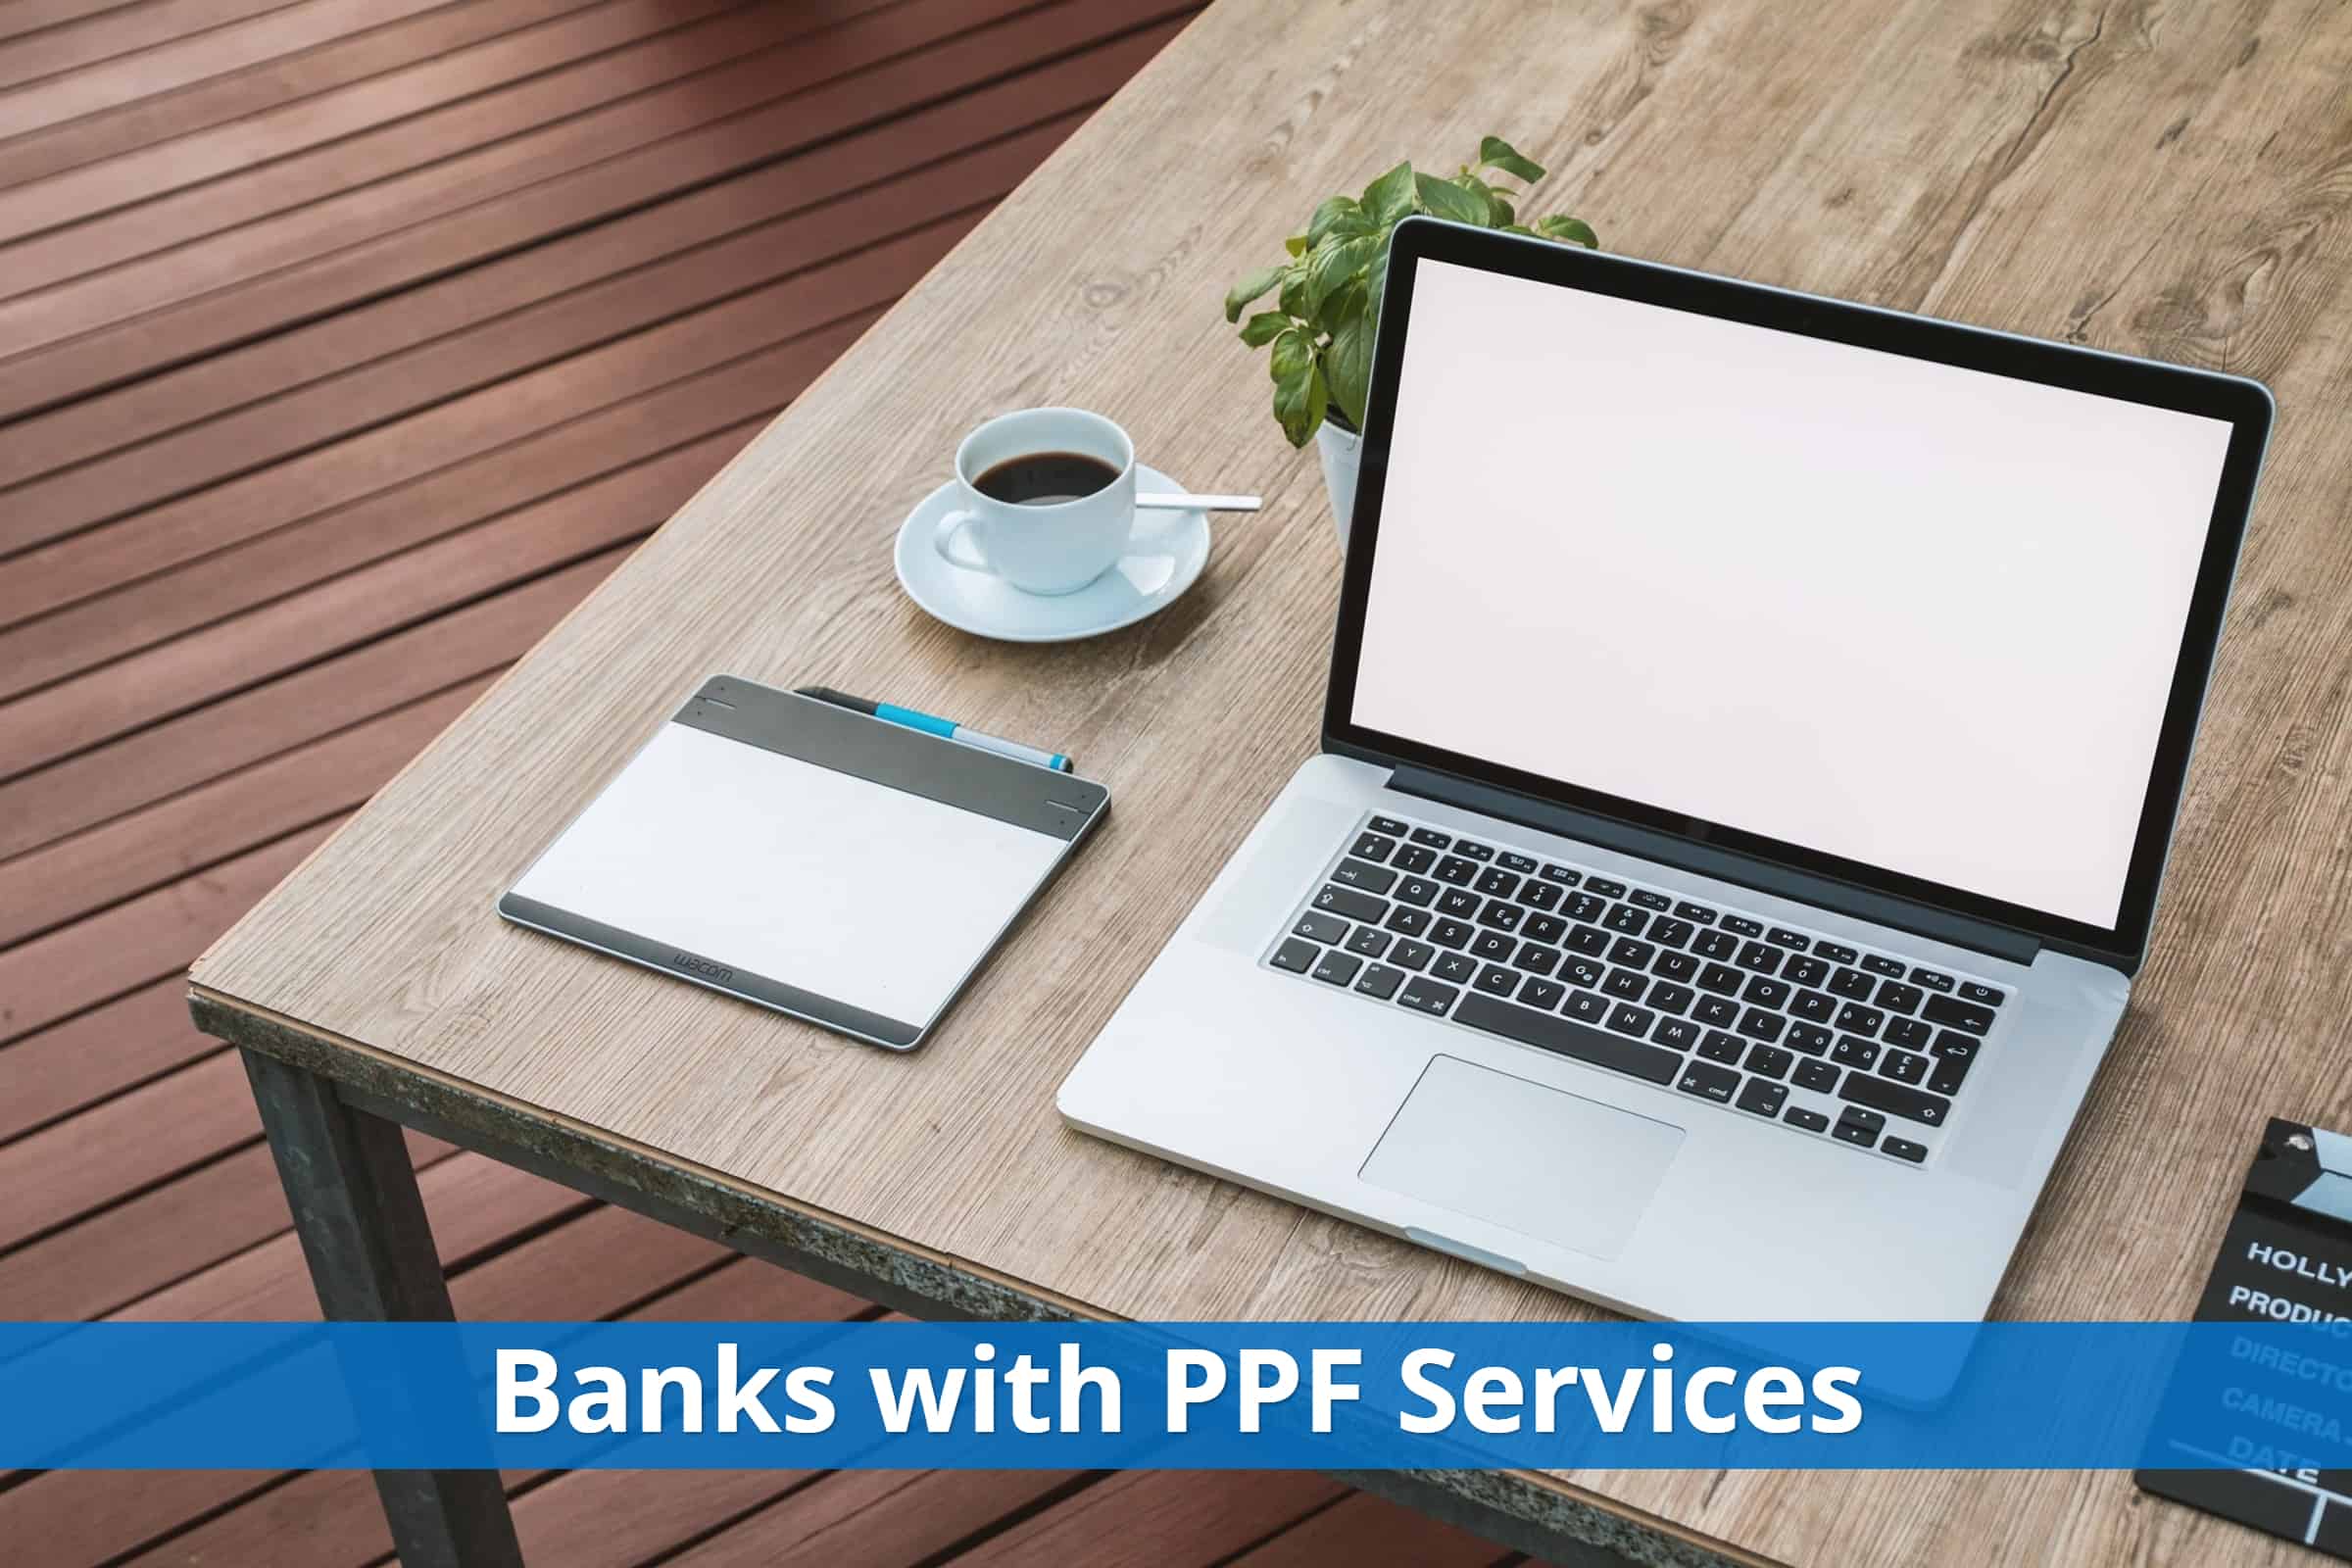 7 Major Banks Offering PPF Account Services